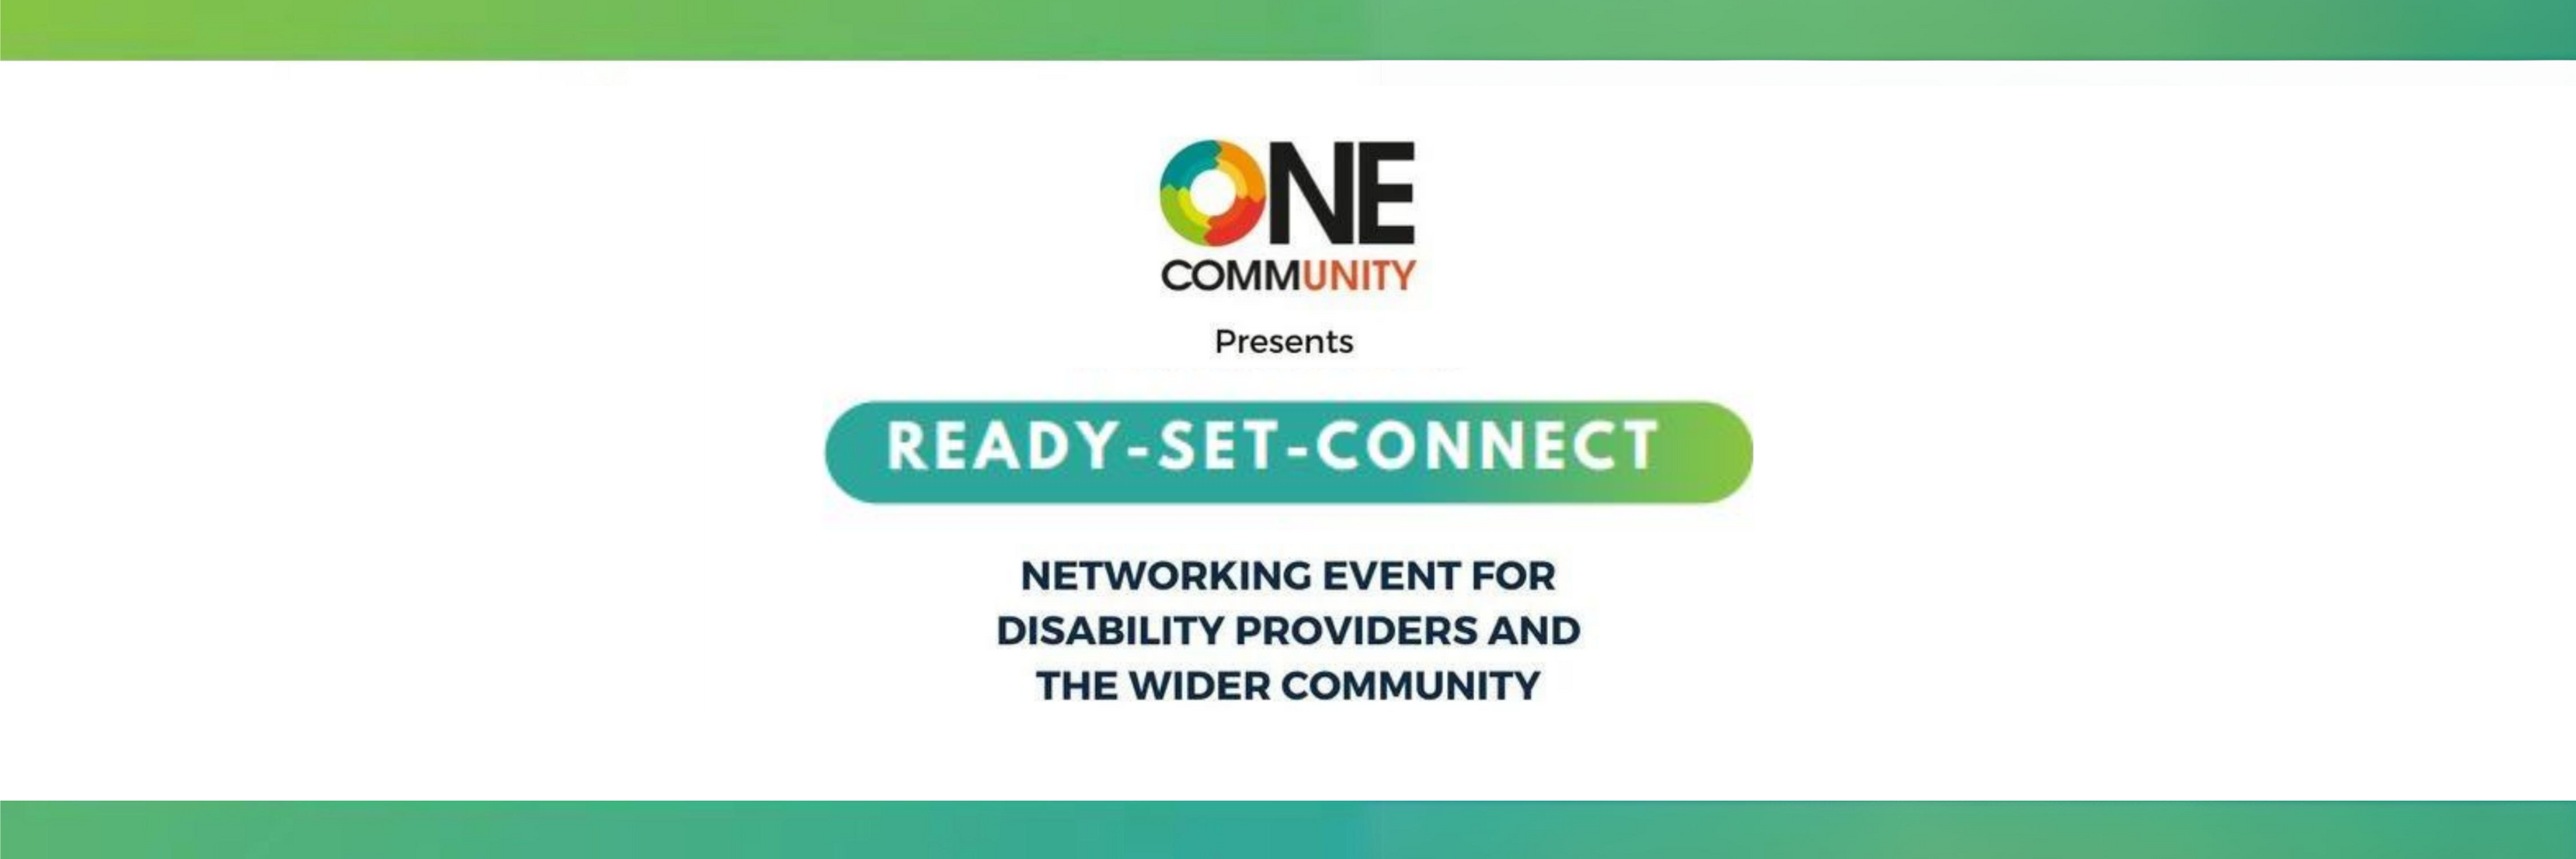 One Community branding for ready set connect